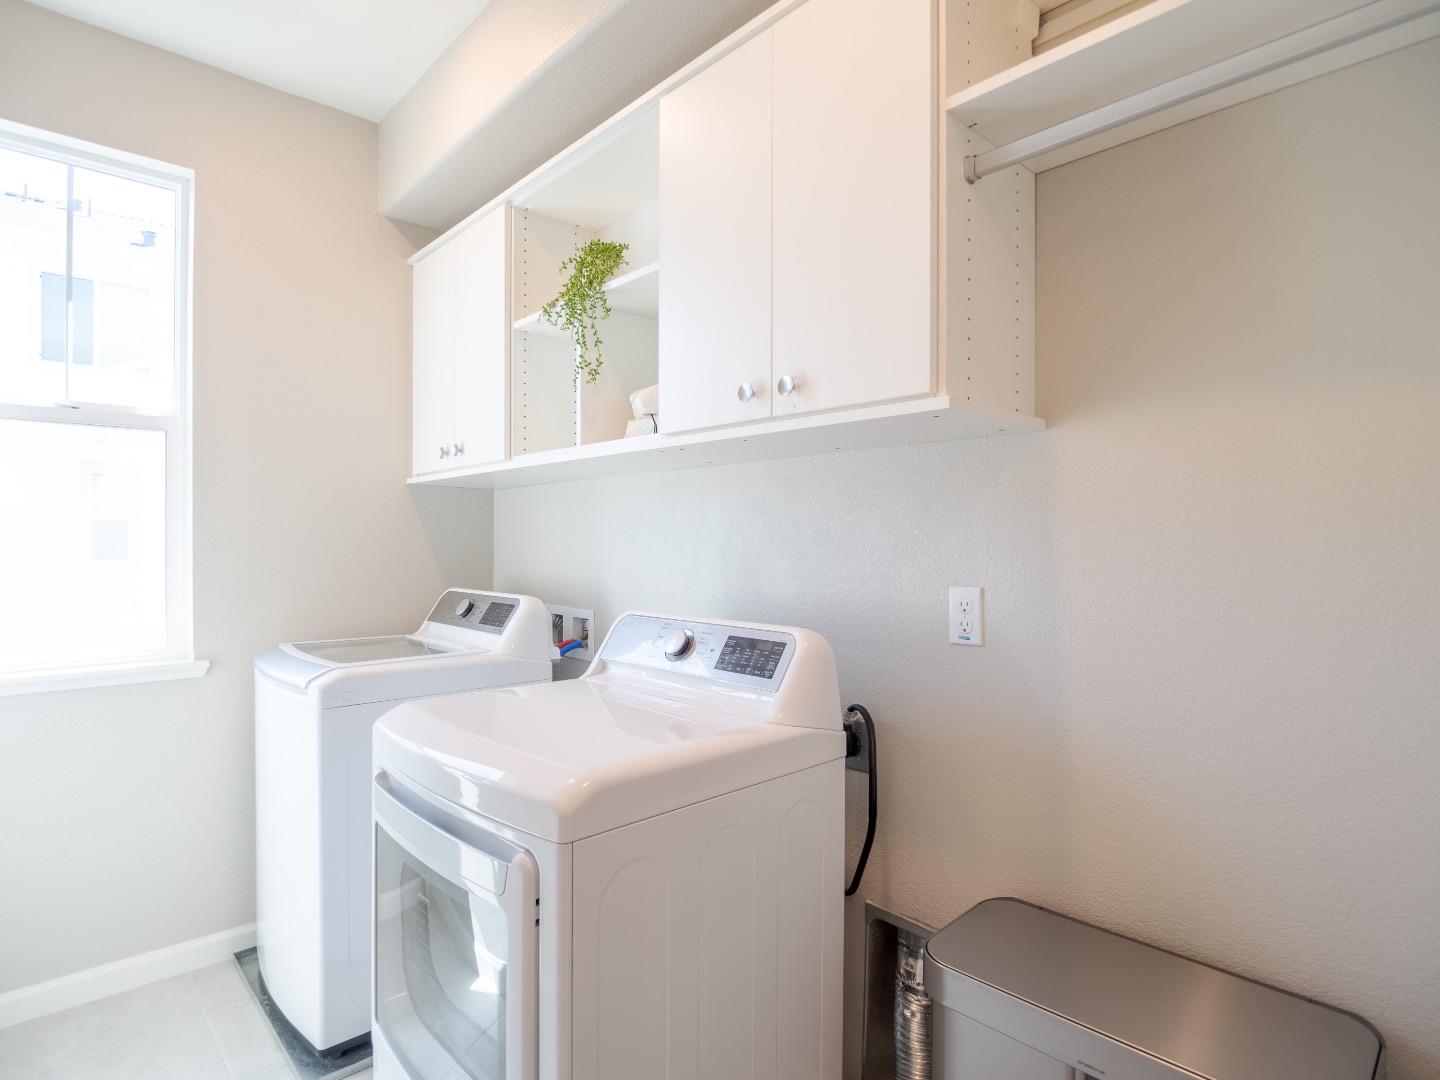 Main floor laundry room, located off of the kitchen.